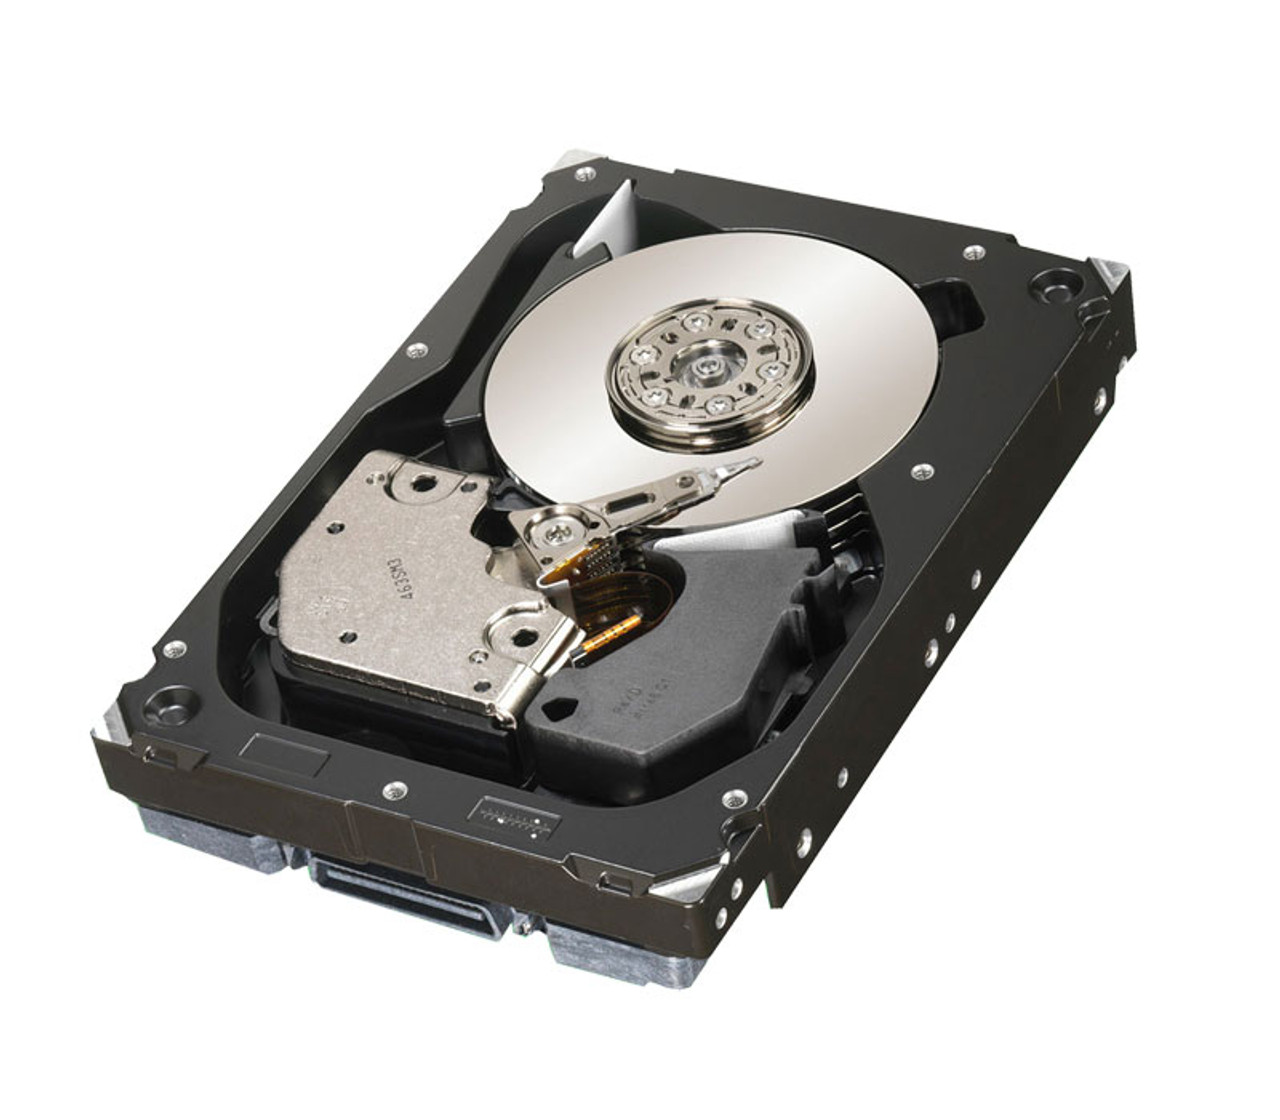 118032494 EMC 146GB 10000RPM Fibre Channel 2Gbps 8MB Cache 3.5-inch Internal Hard Drive with tray